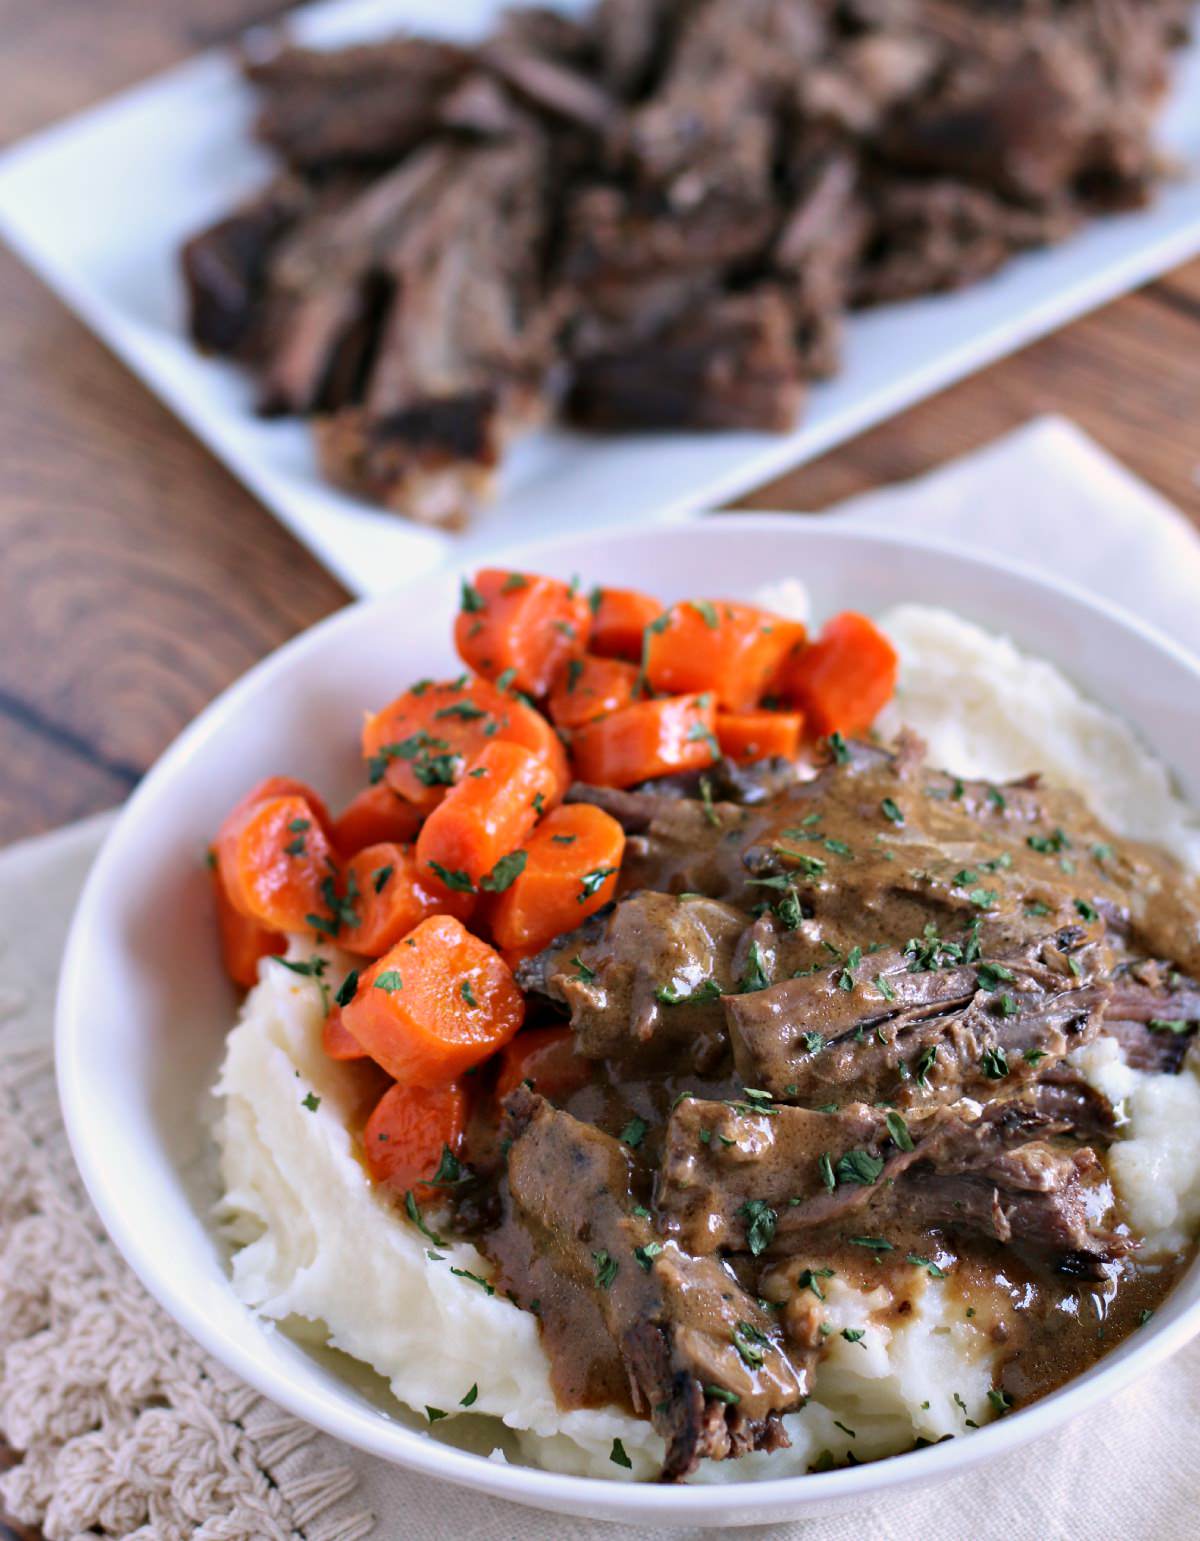 Shredded pot roast with gravy over mashed potatoes with carrots on side.